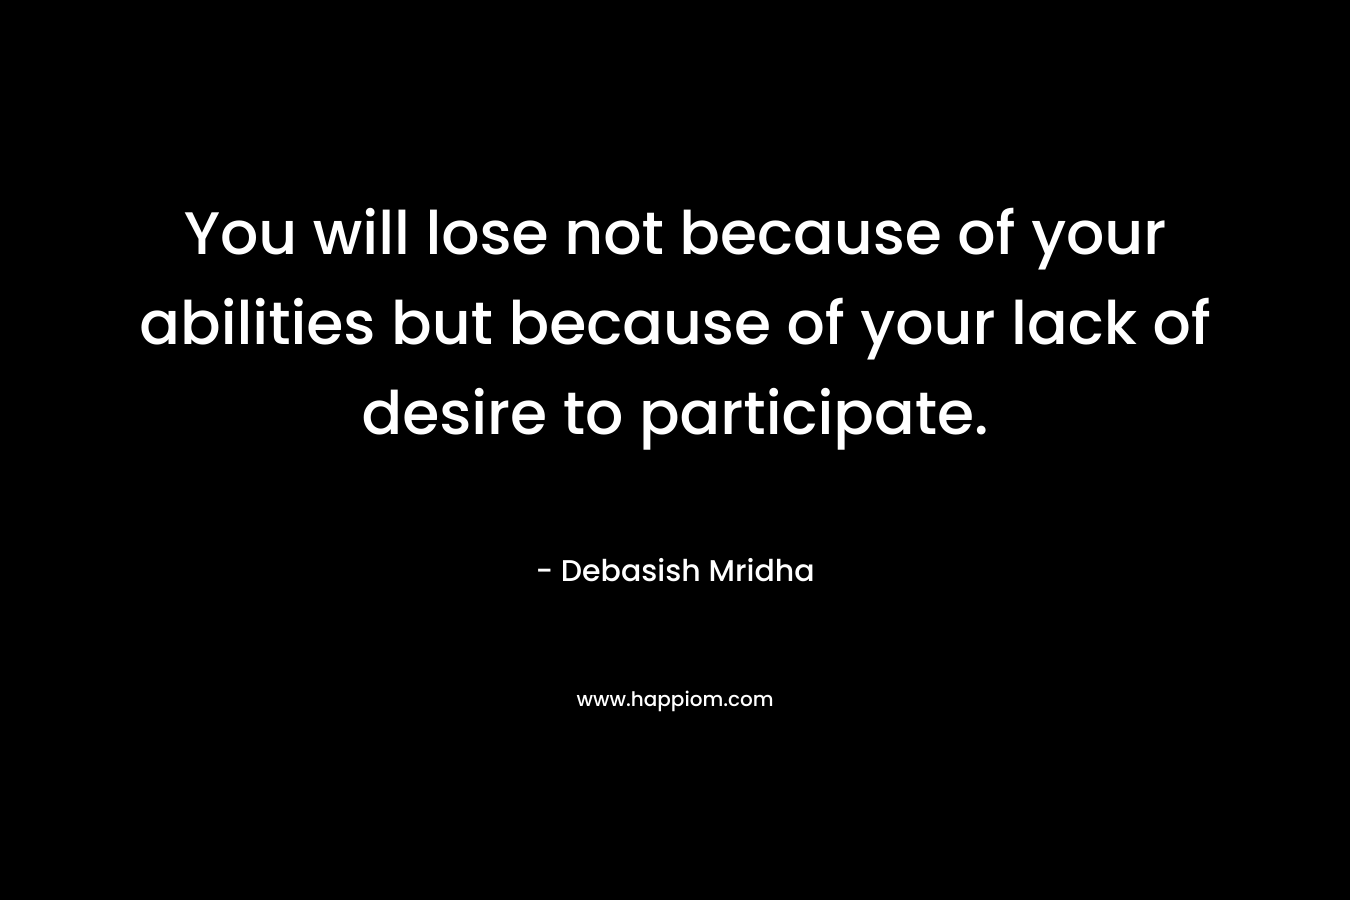 You will lose not because of your abilities but because of your lack of desire to participate.